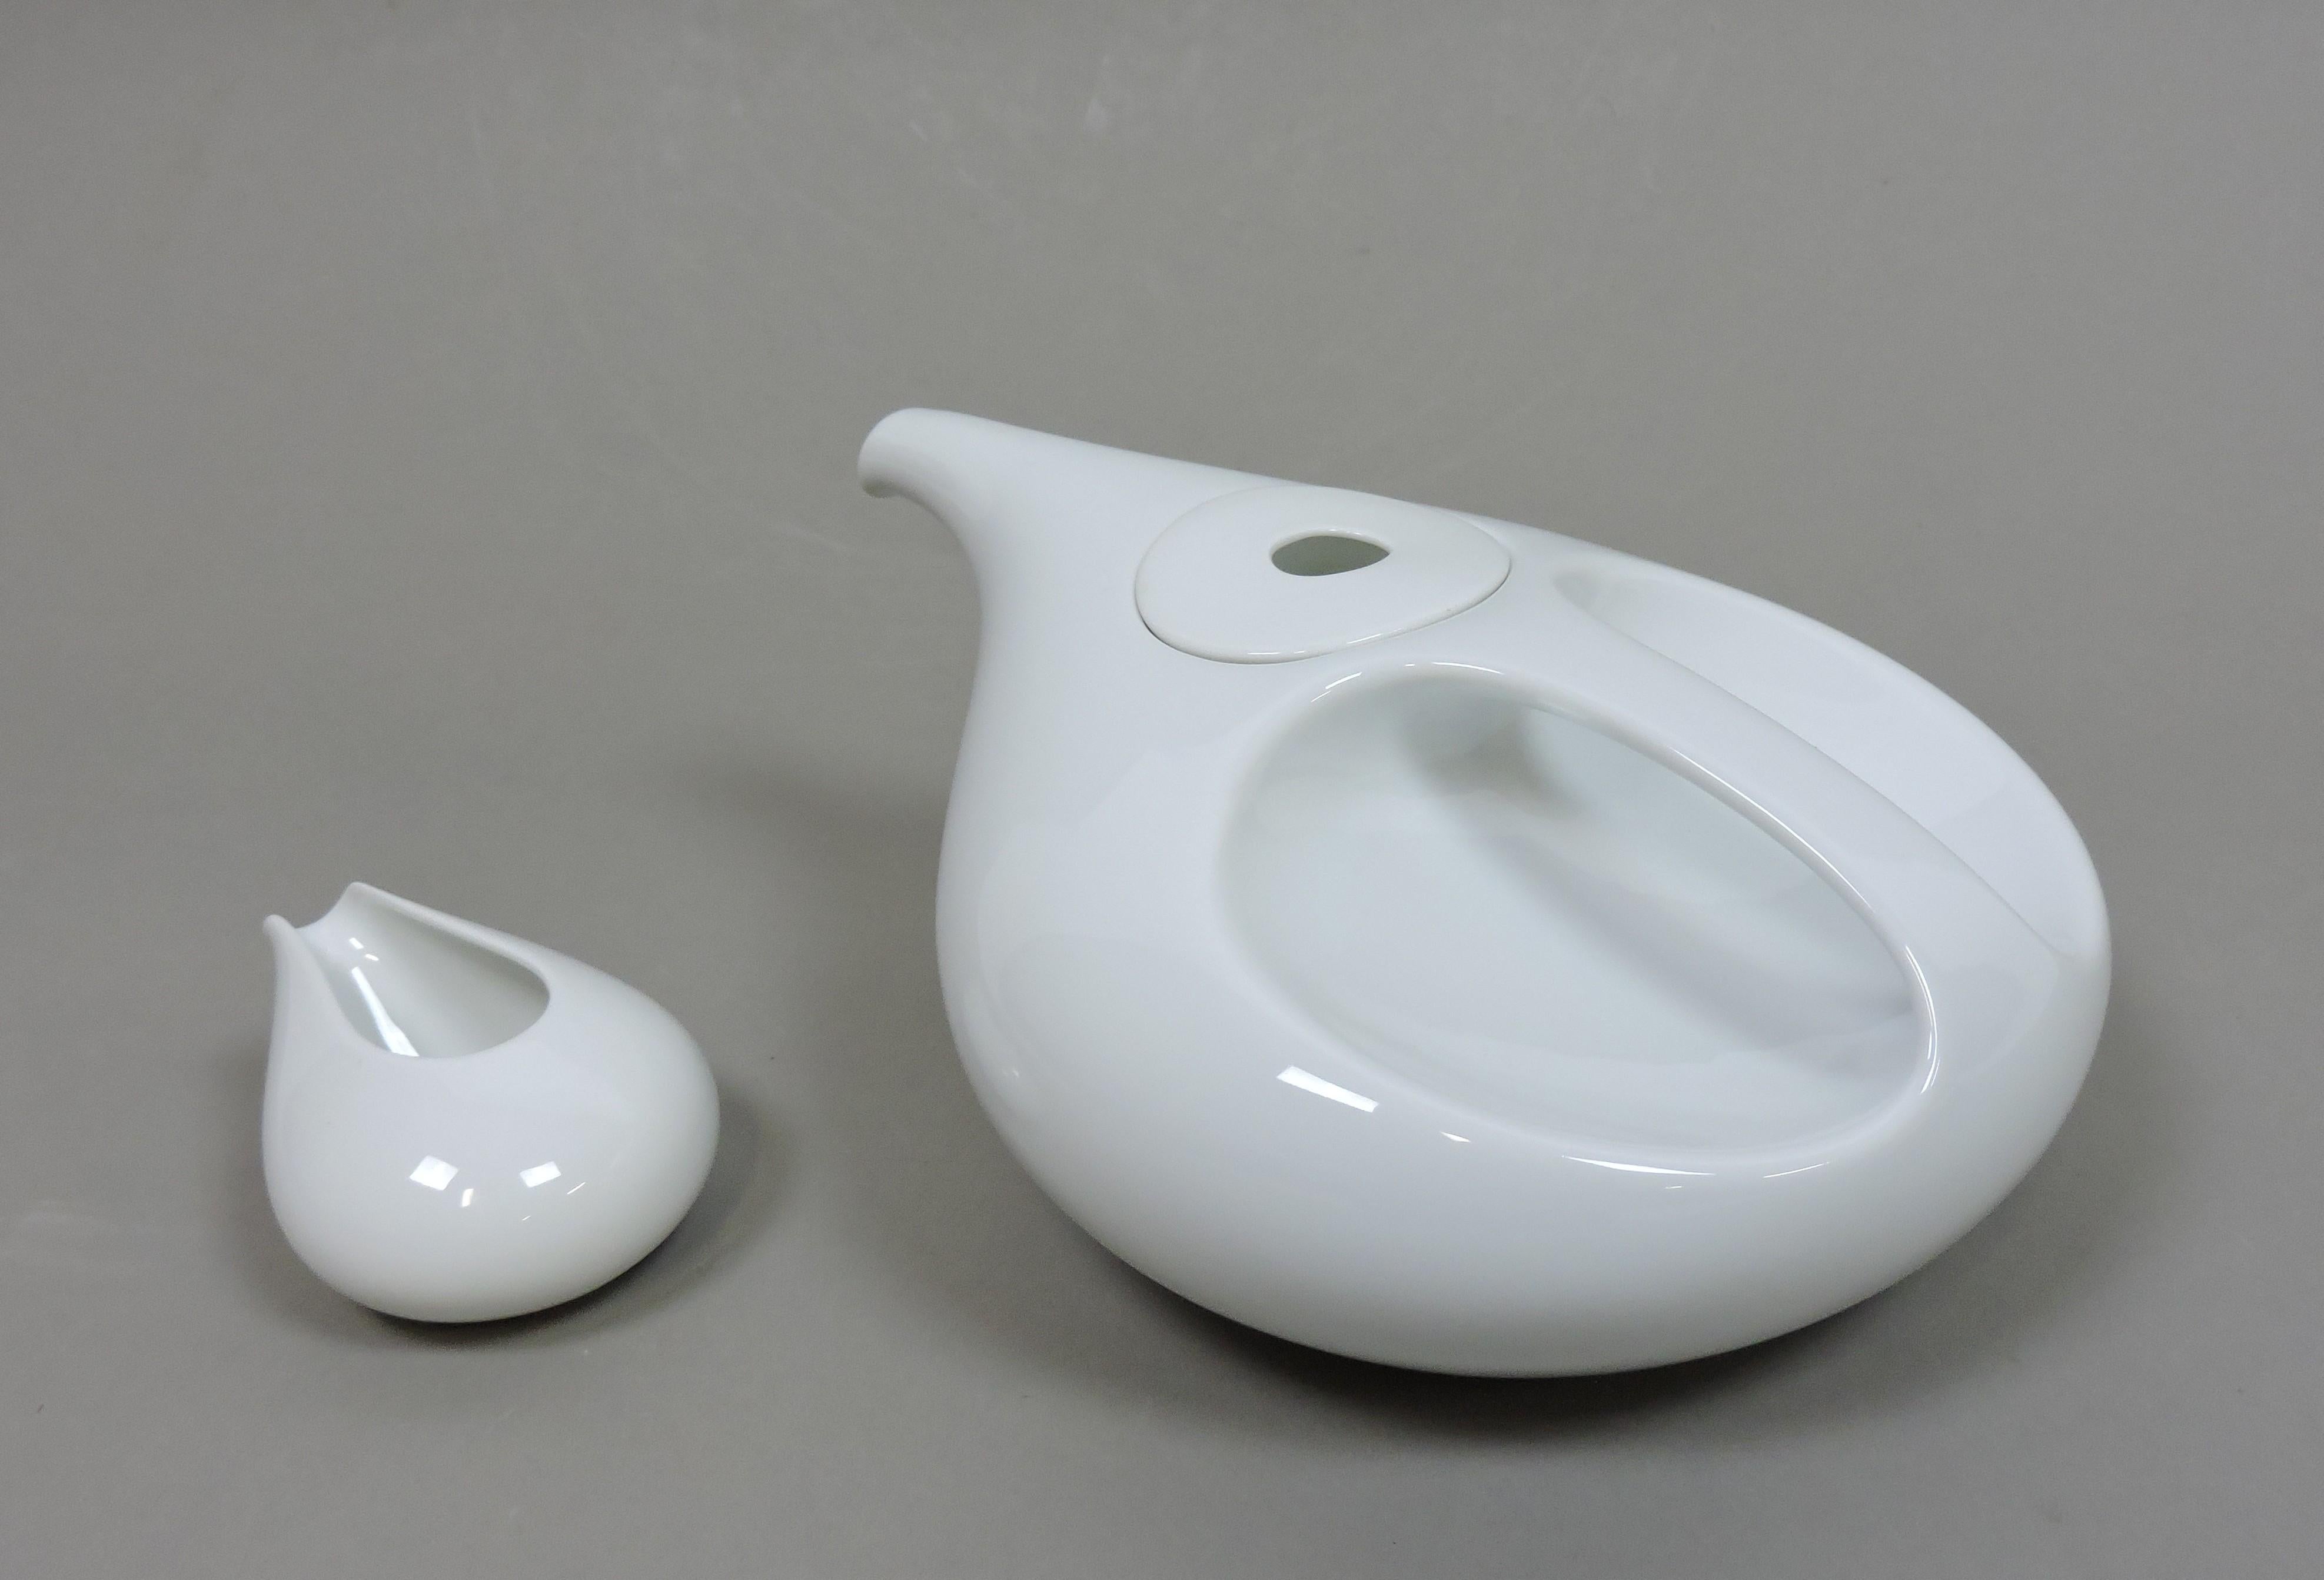 Rare and collectible teapot and creamer that's from the Drop tea service designed in the 1970's by German industrial designer Luigi Colani and manufactured in Germany by Rosenthal. These porcelain pieces have a beautiful aerodynamic shape and are in